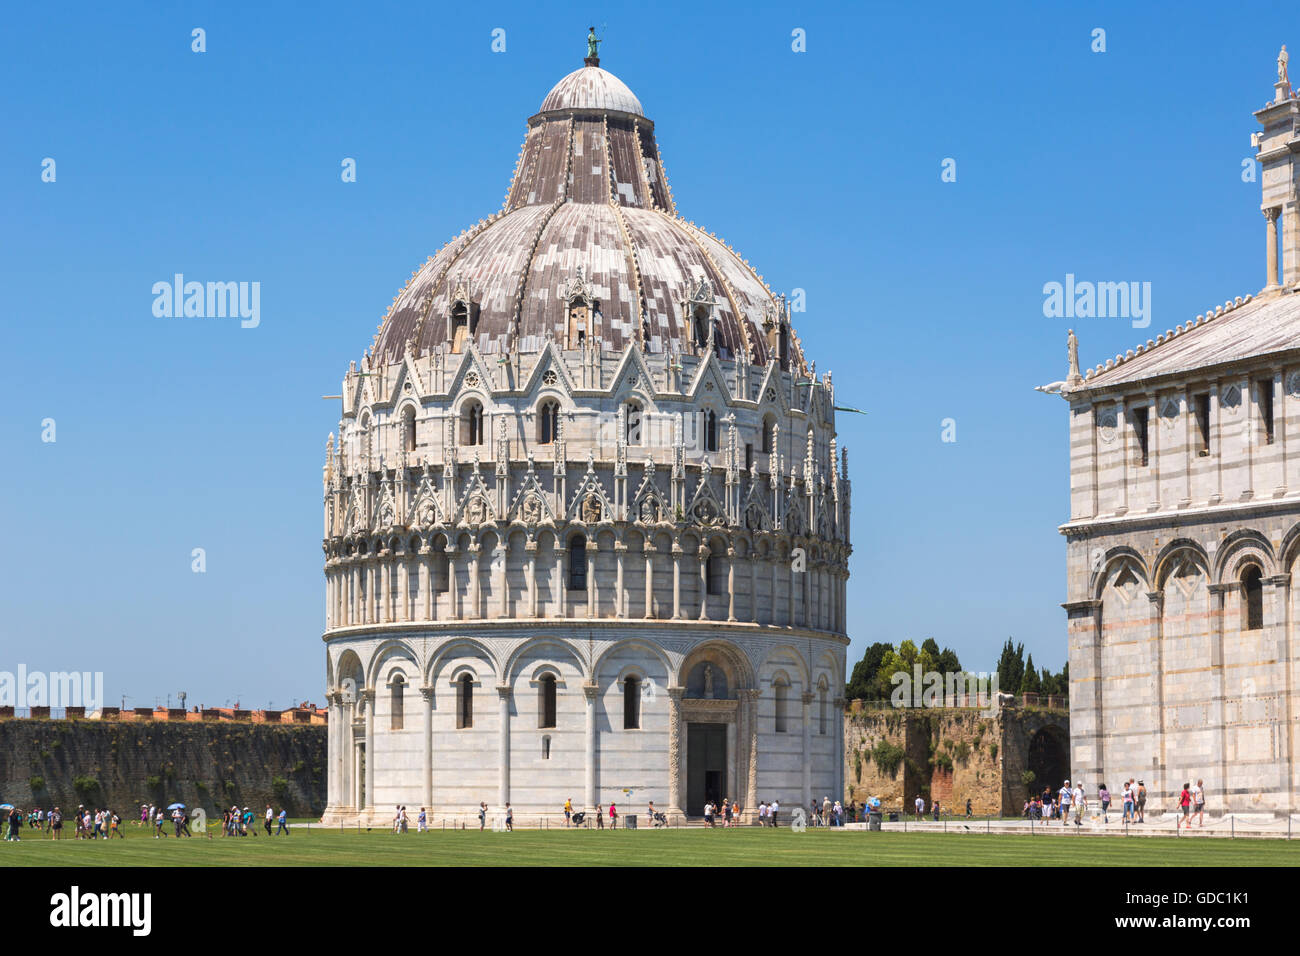 Pisa, Pisa Province, Tuscany, Italy. The Baptistery in the Campo dei Miracoli, or Field of Miracles.  Aka Piazza del  Duomo. Stock Photo